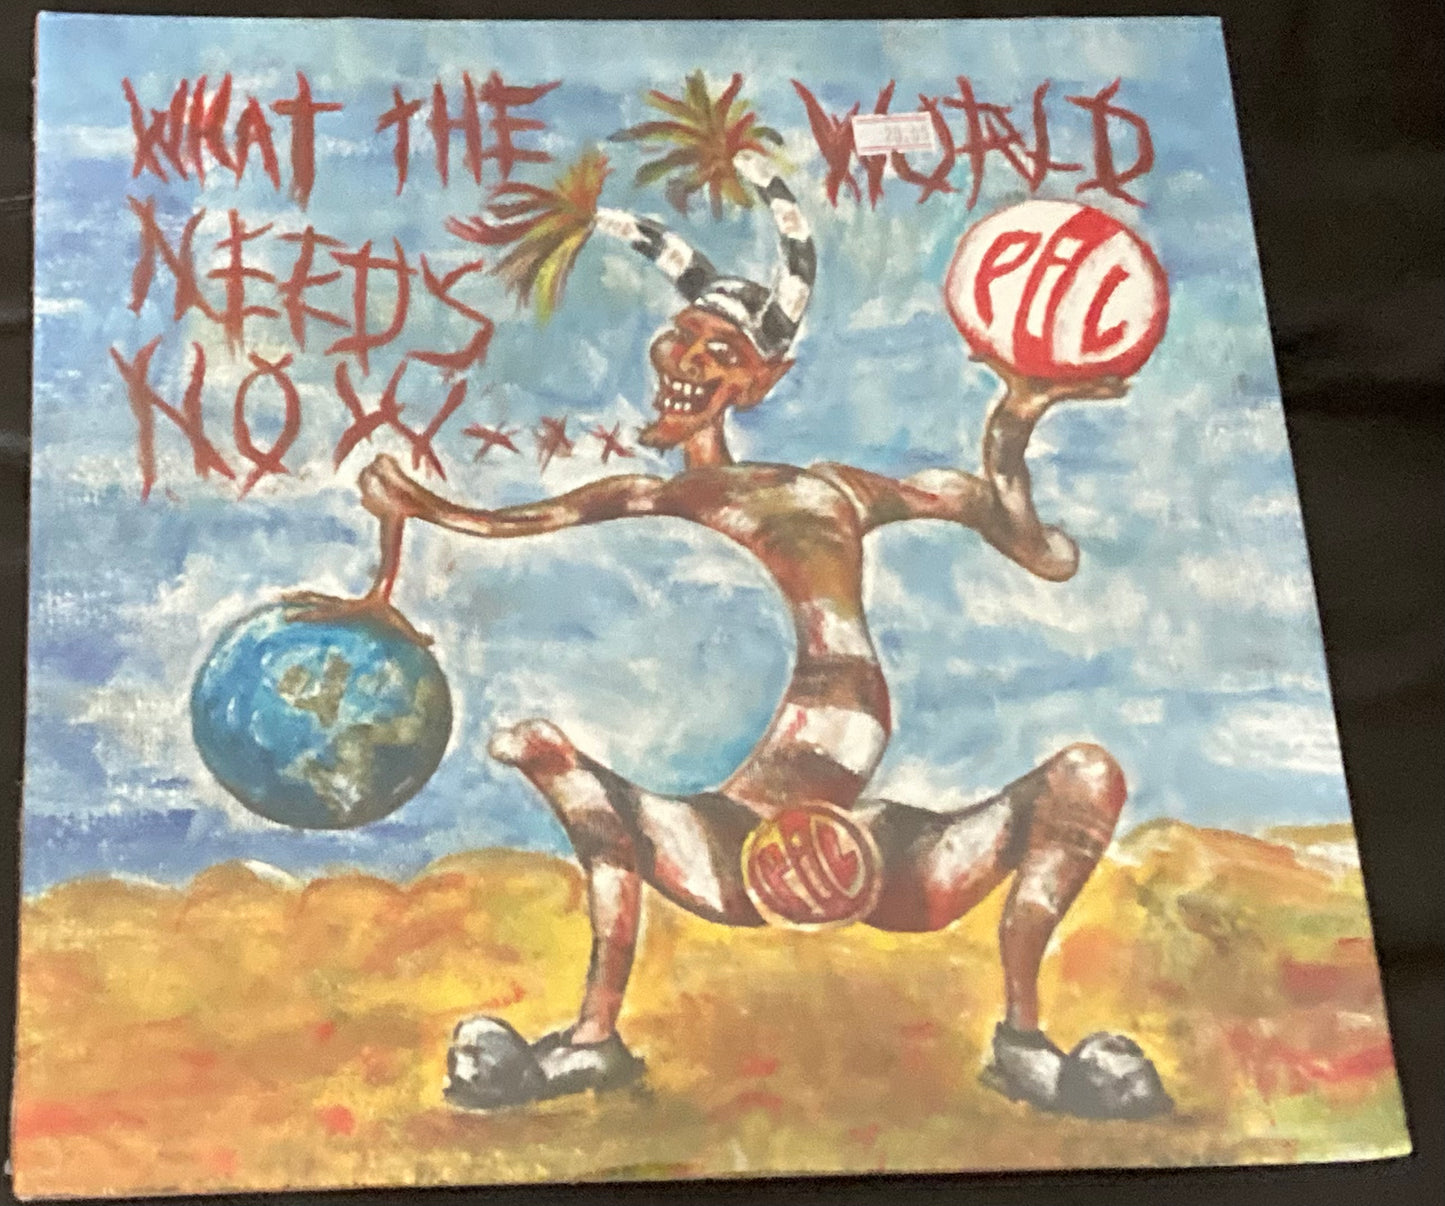 The front of 'Public Image Ltd - What the World Needs Now' on vinyl